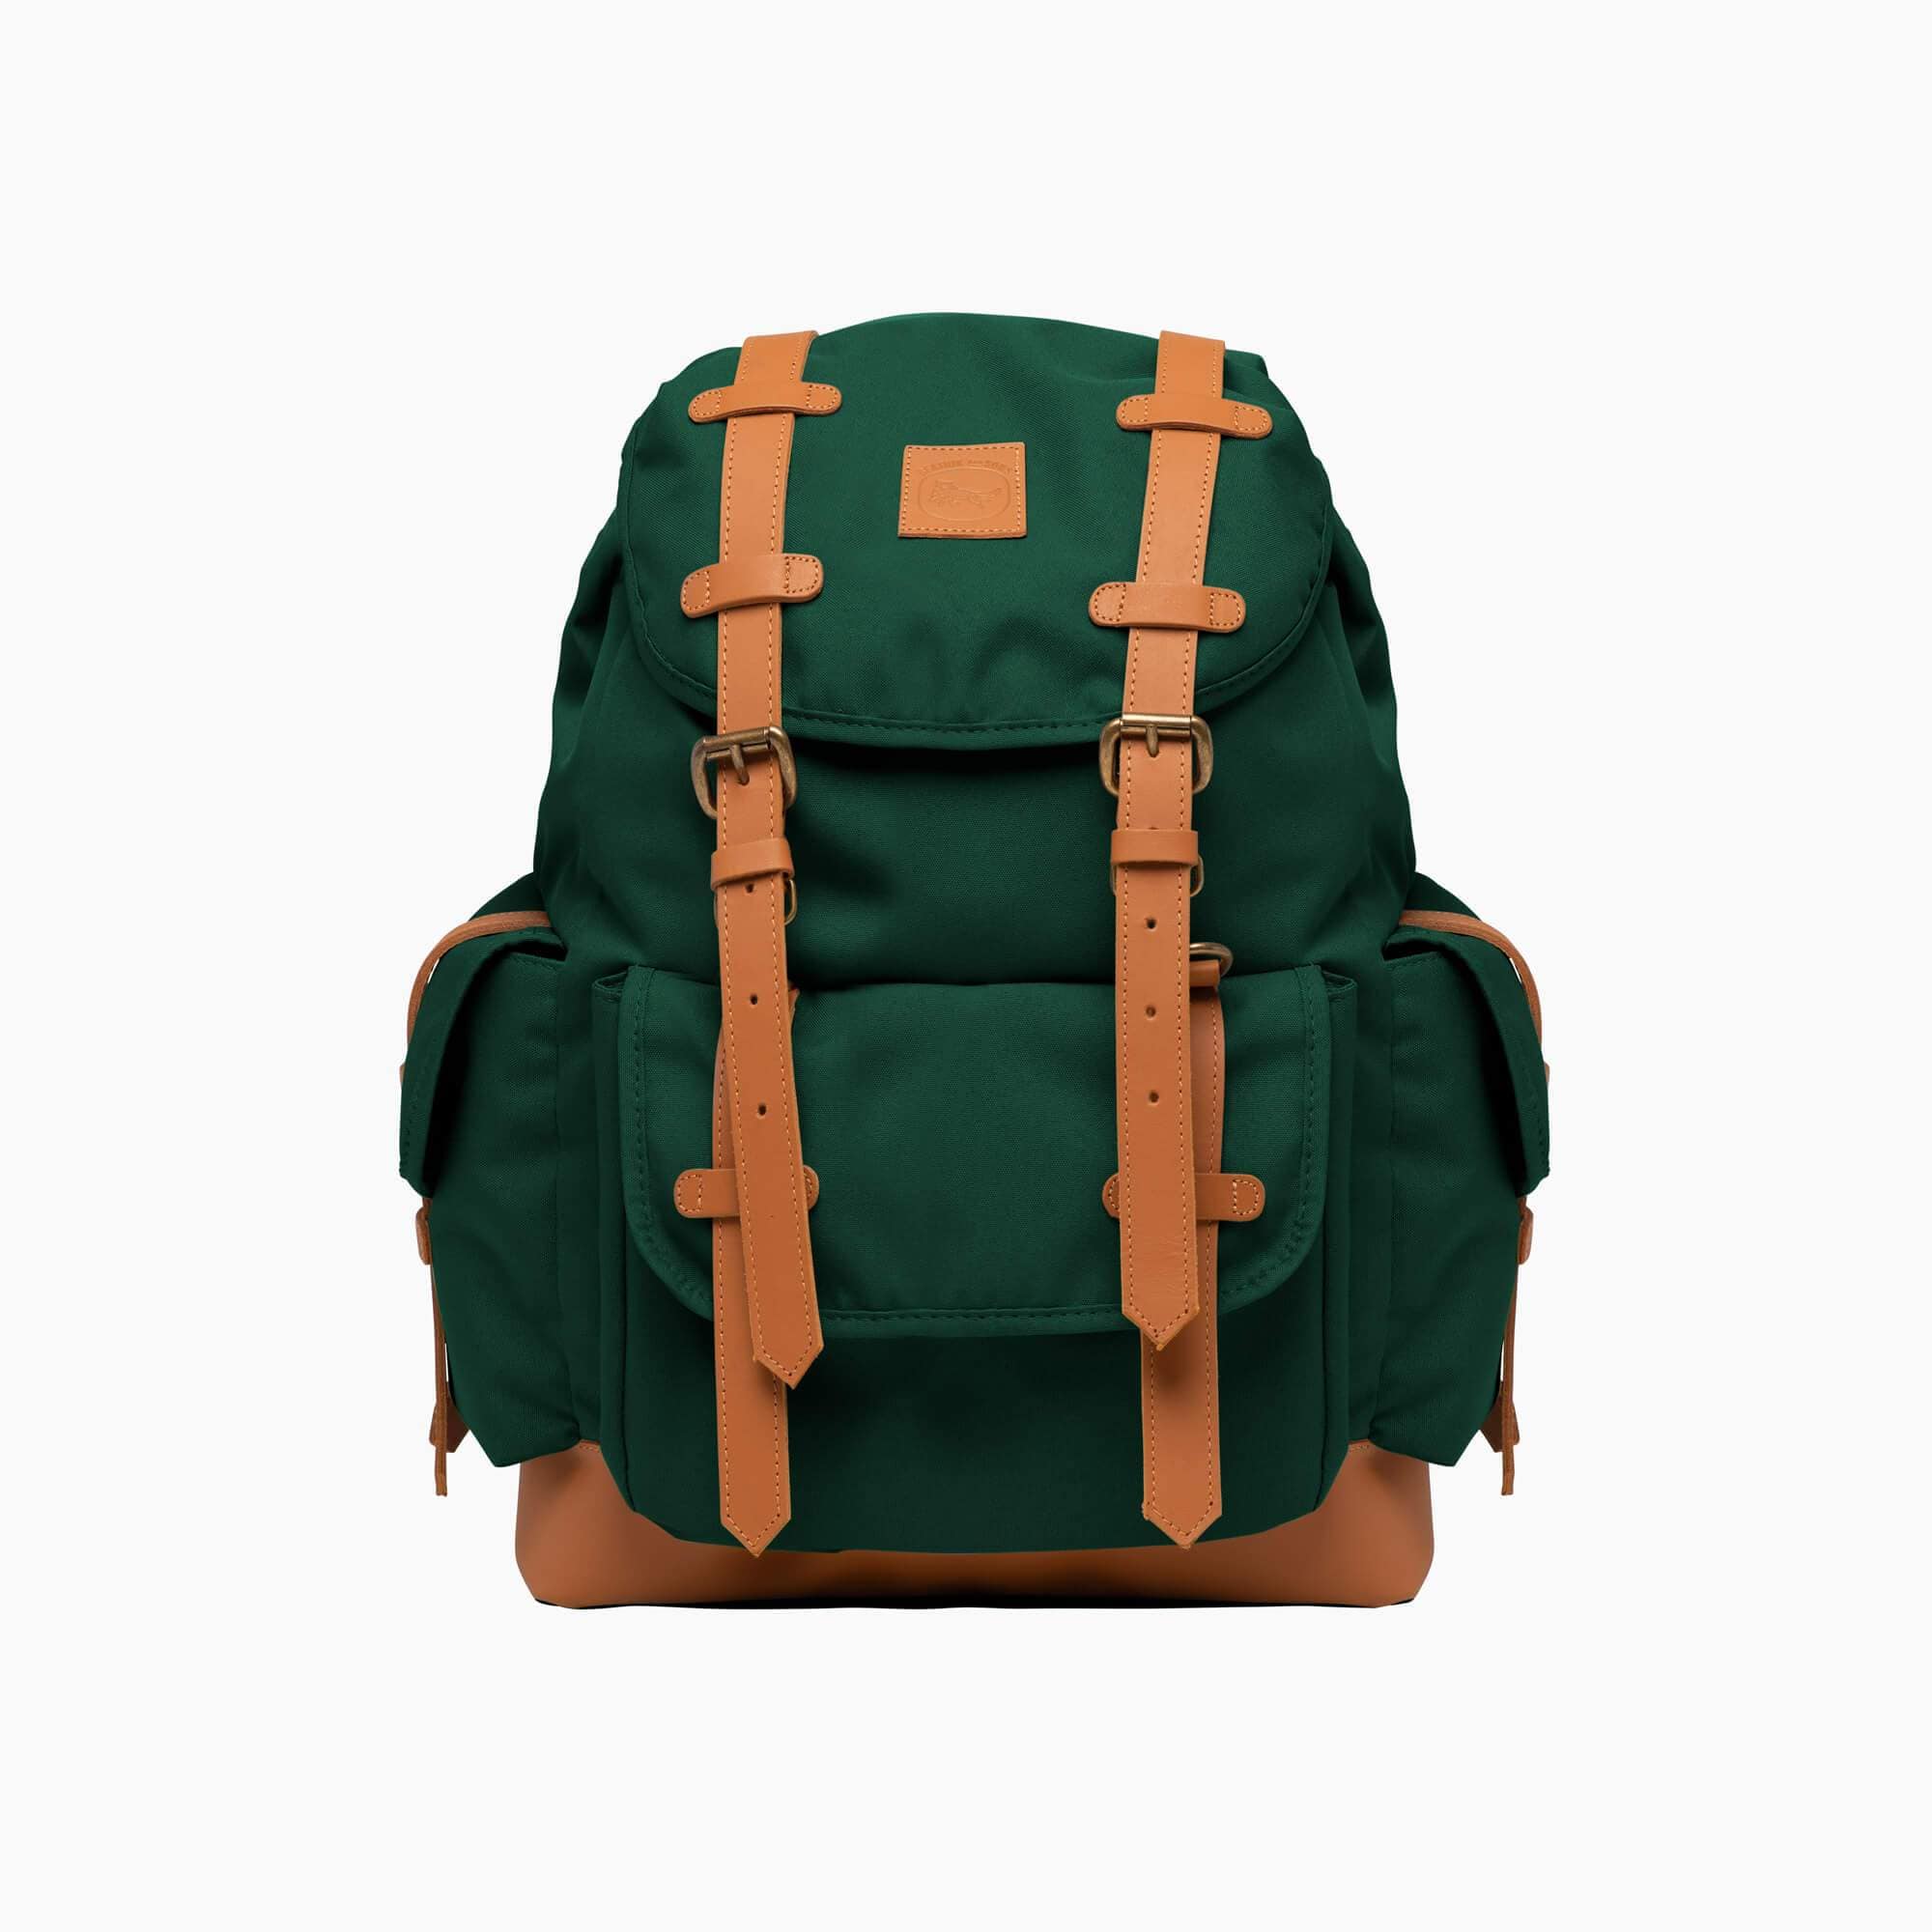 the Henry backpack